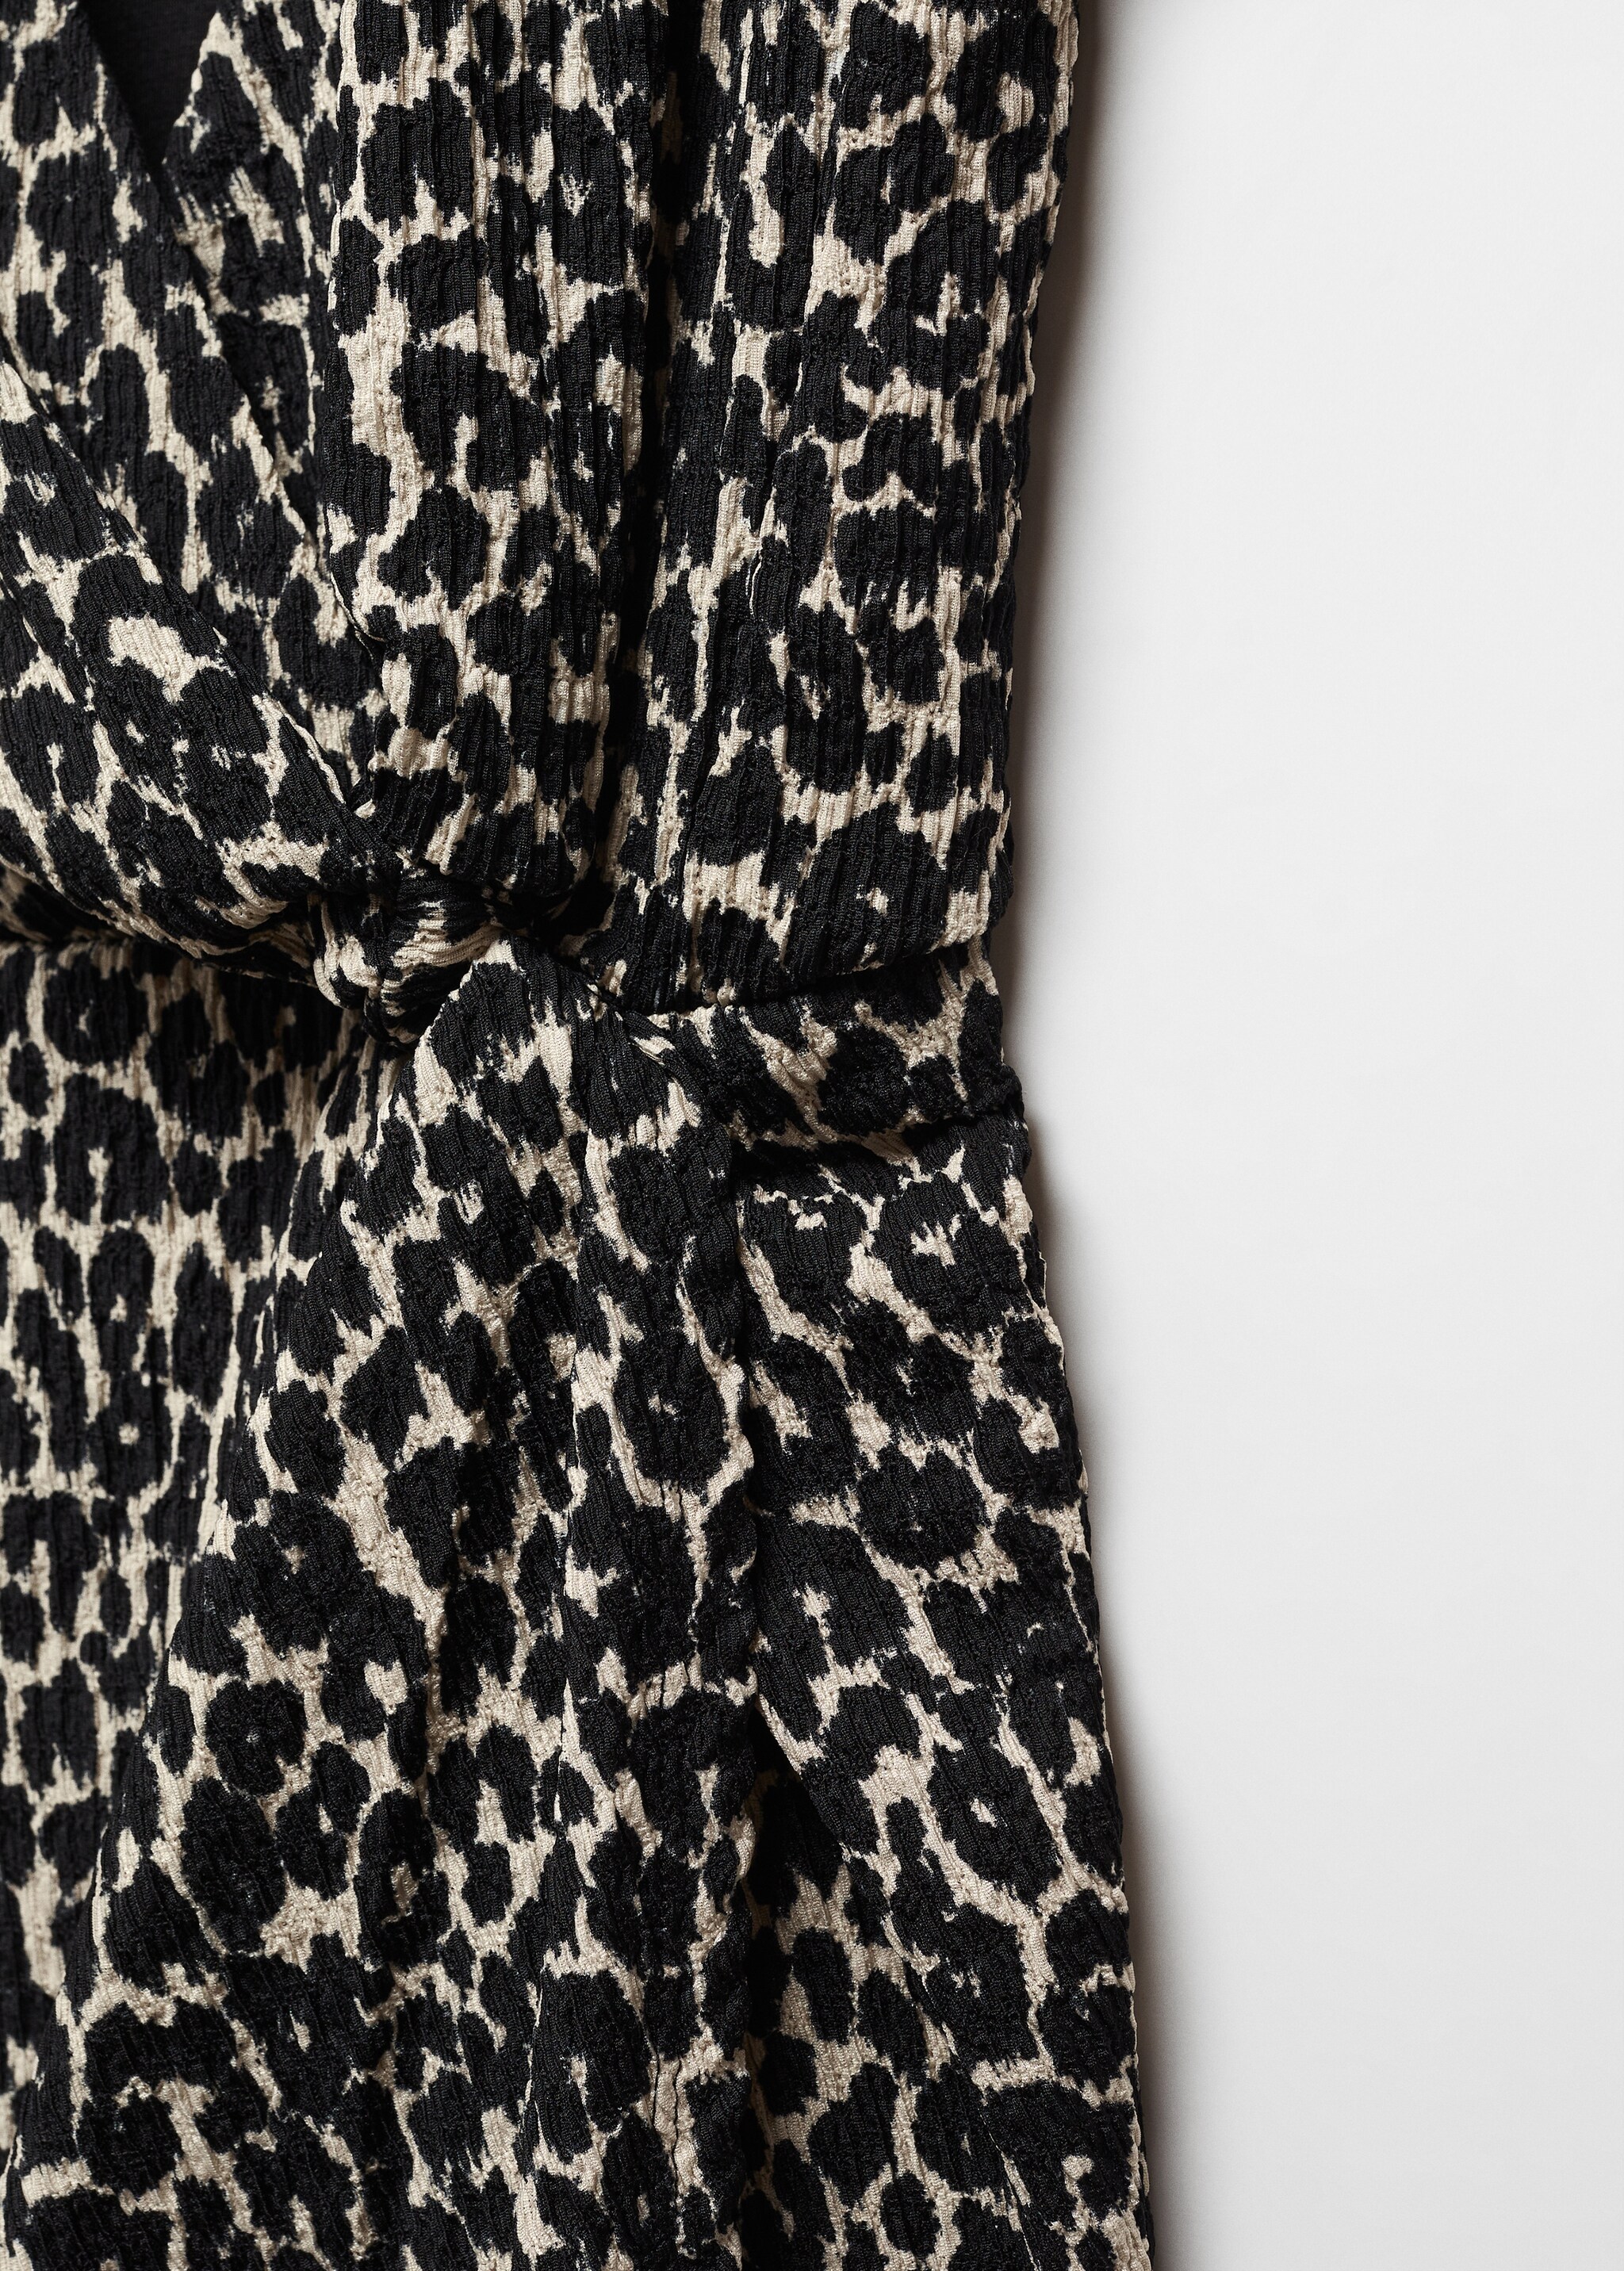 Animal-print textured dress - Details of the article 8